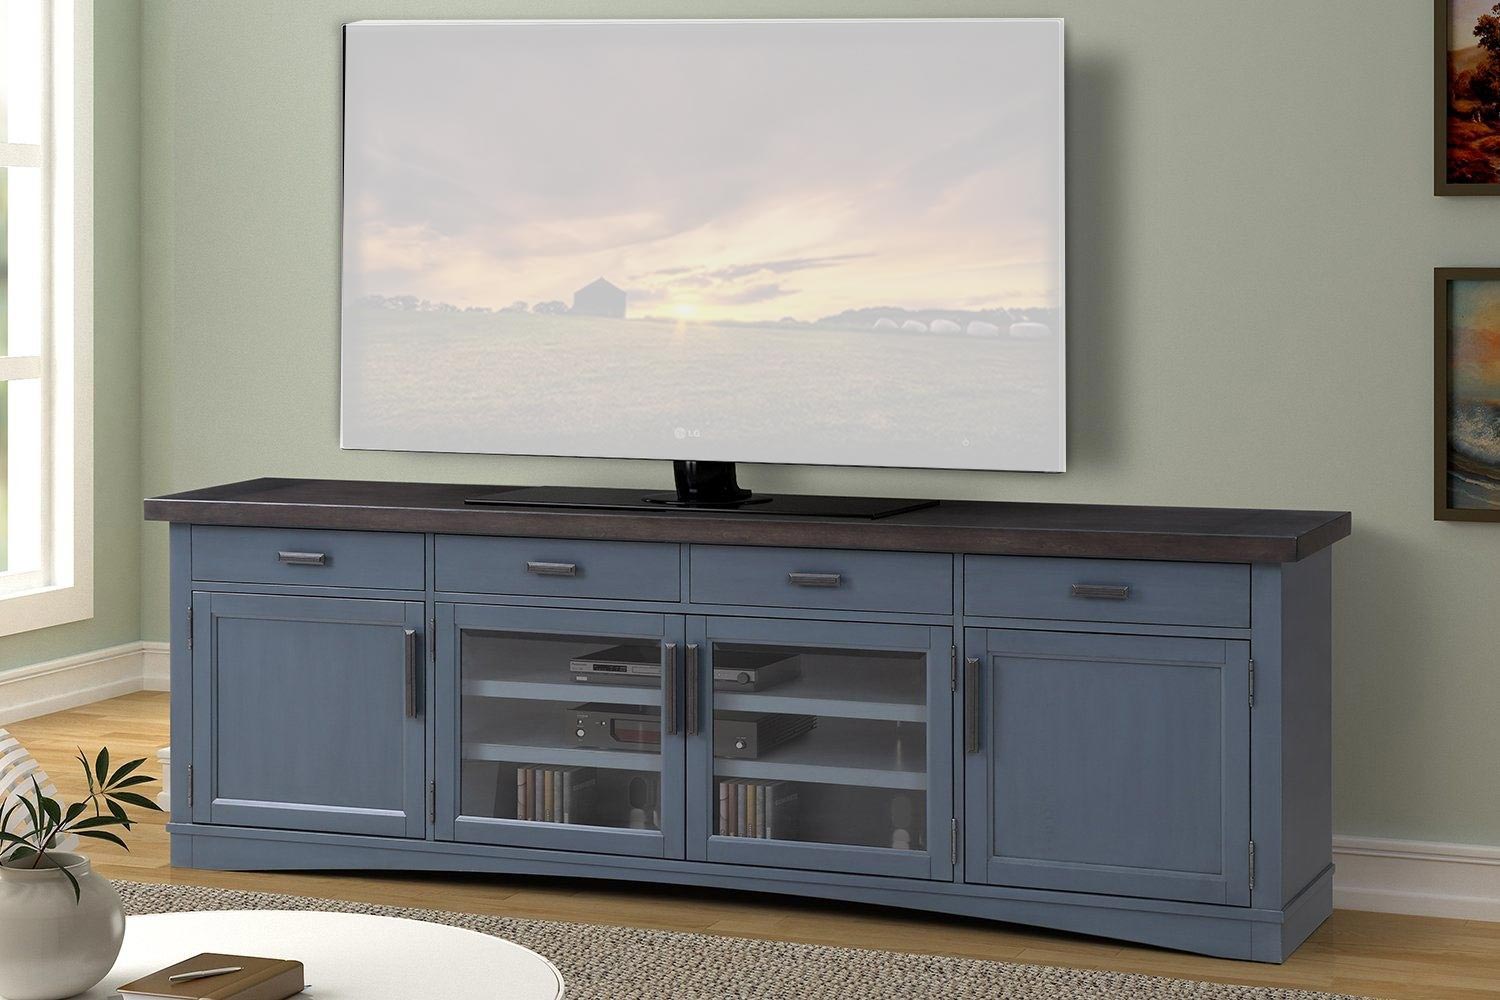 Parker House Americana Modern 92 Inch TV Console - Denim with Sable wood top